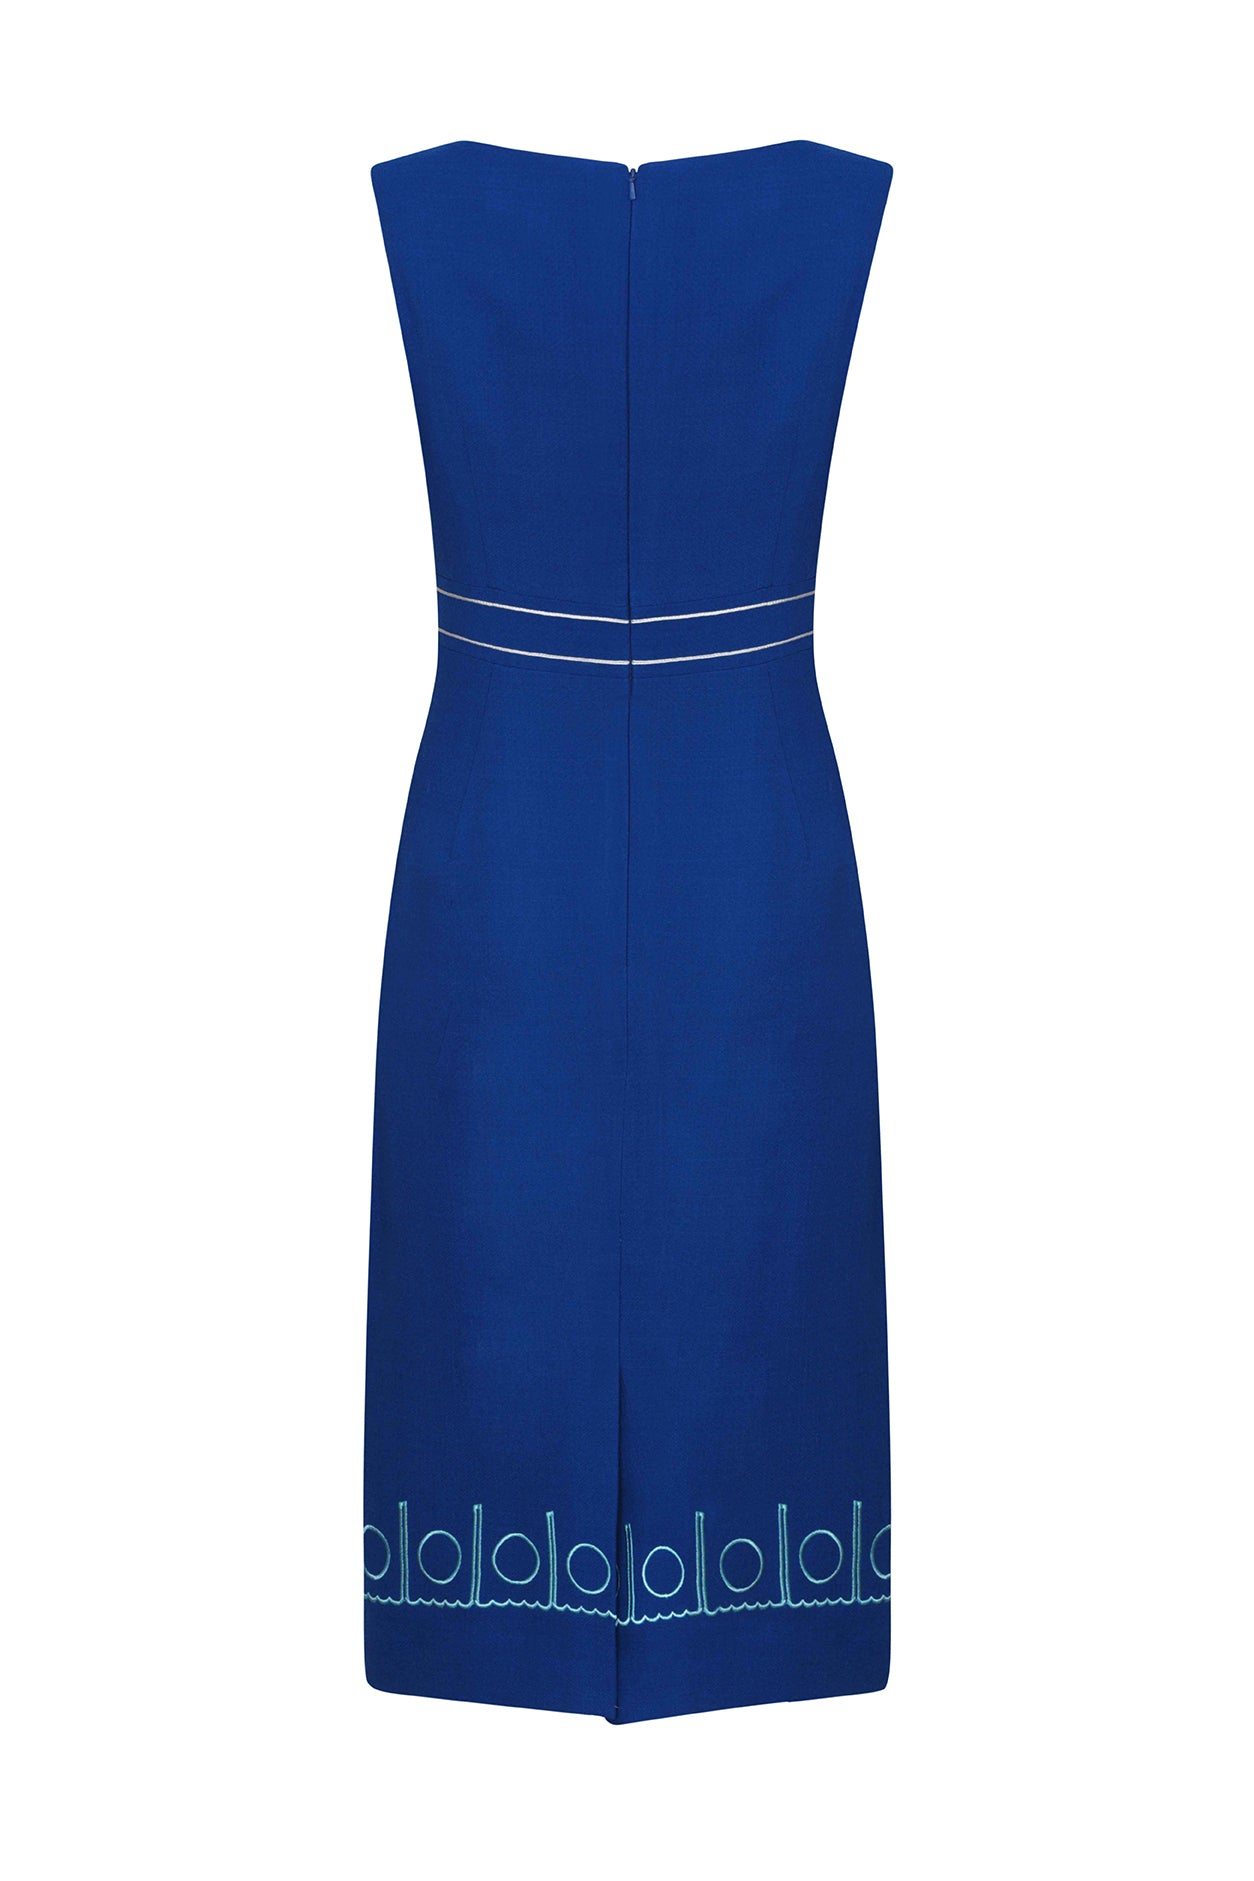 Sleeveless Shift Dress in Royal Blue with Turquoise Embroidered Border - Aude